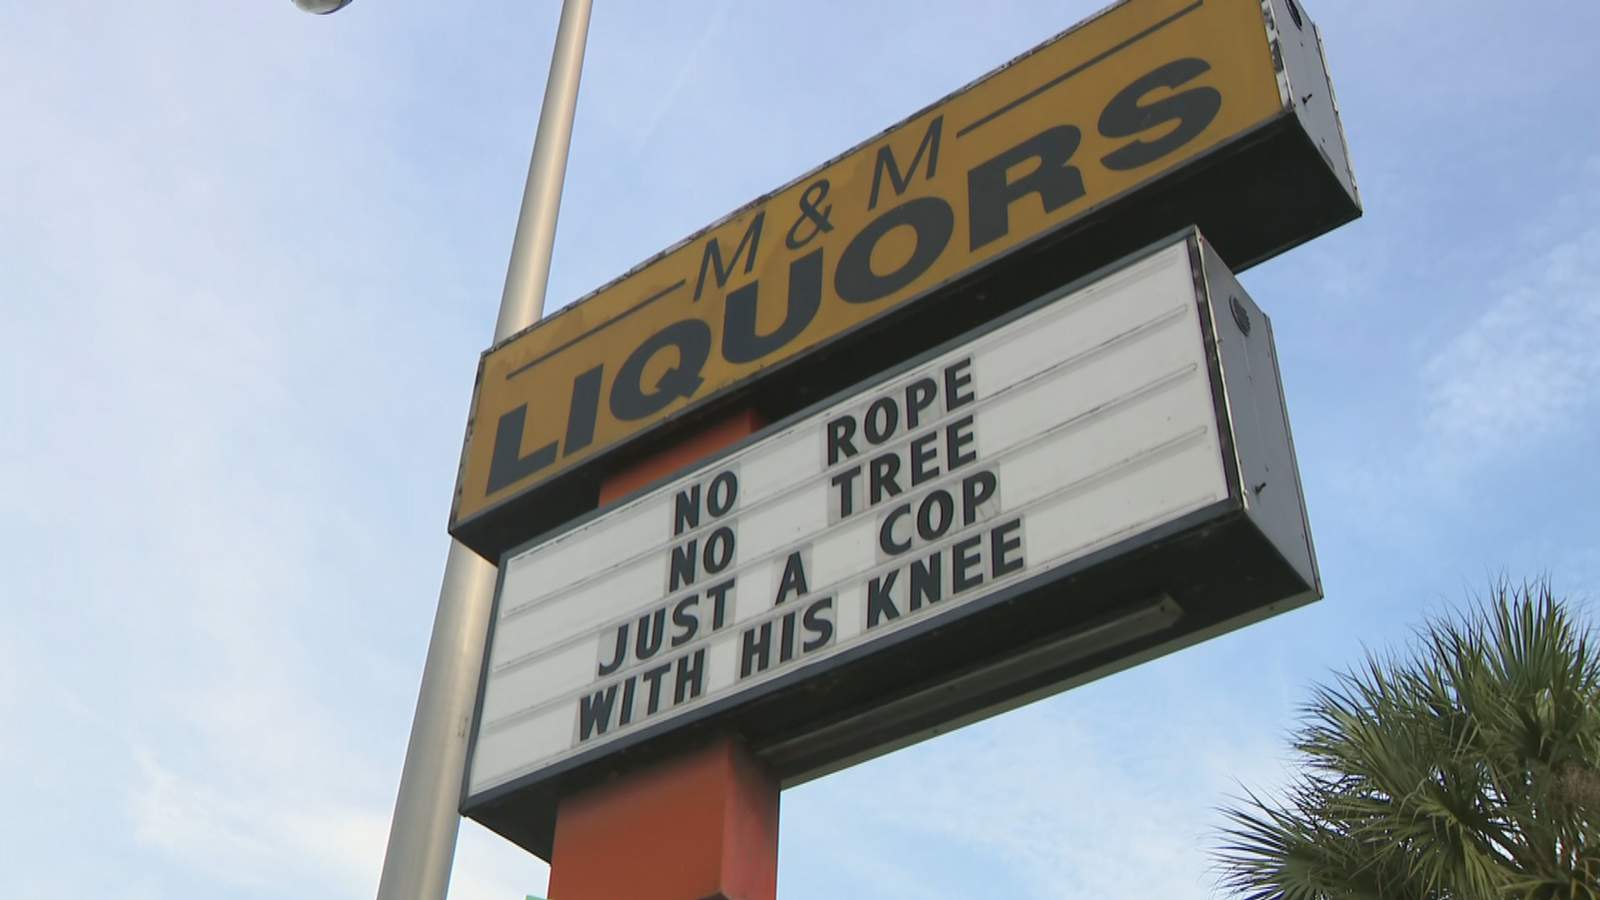 The owner of M&M Liquors in Hialeah put up a sign that is getting some attention, as protests across the country continue following the death of George Floyd.